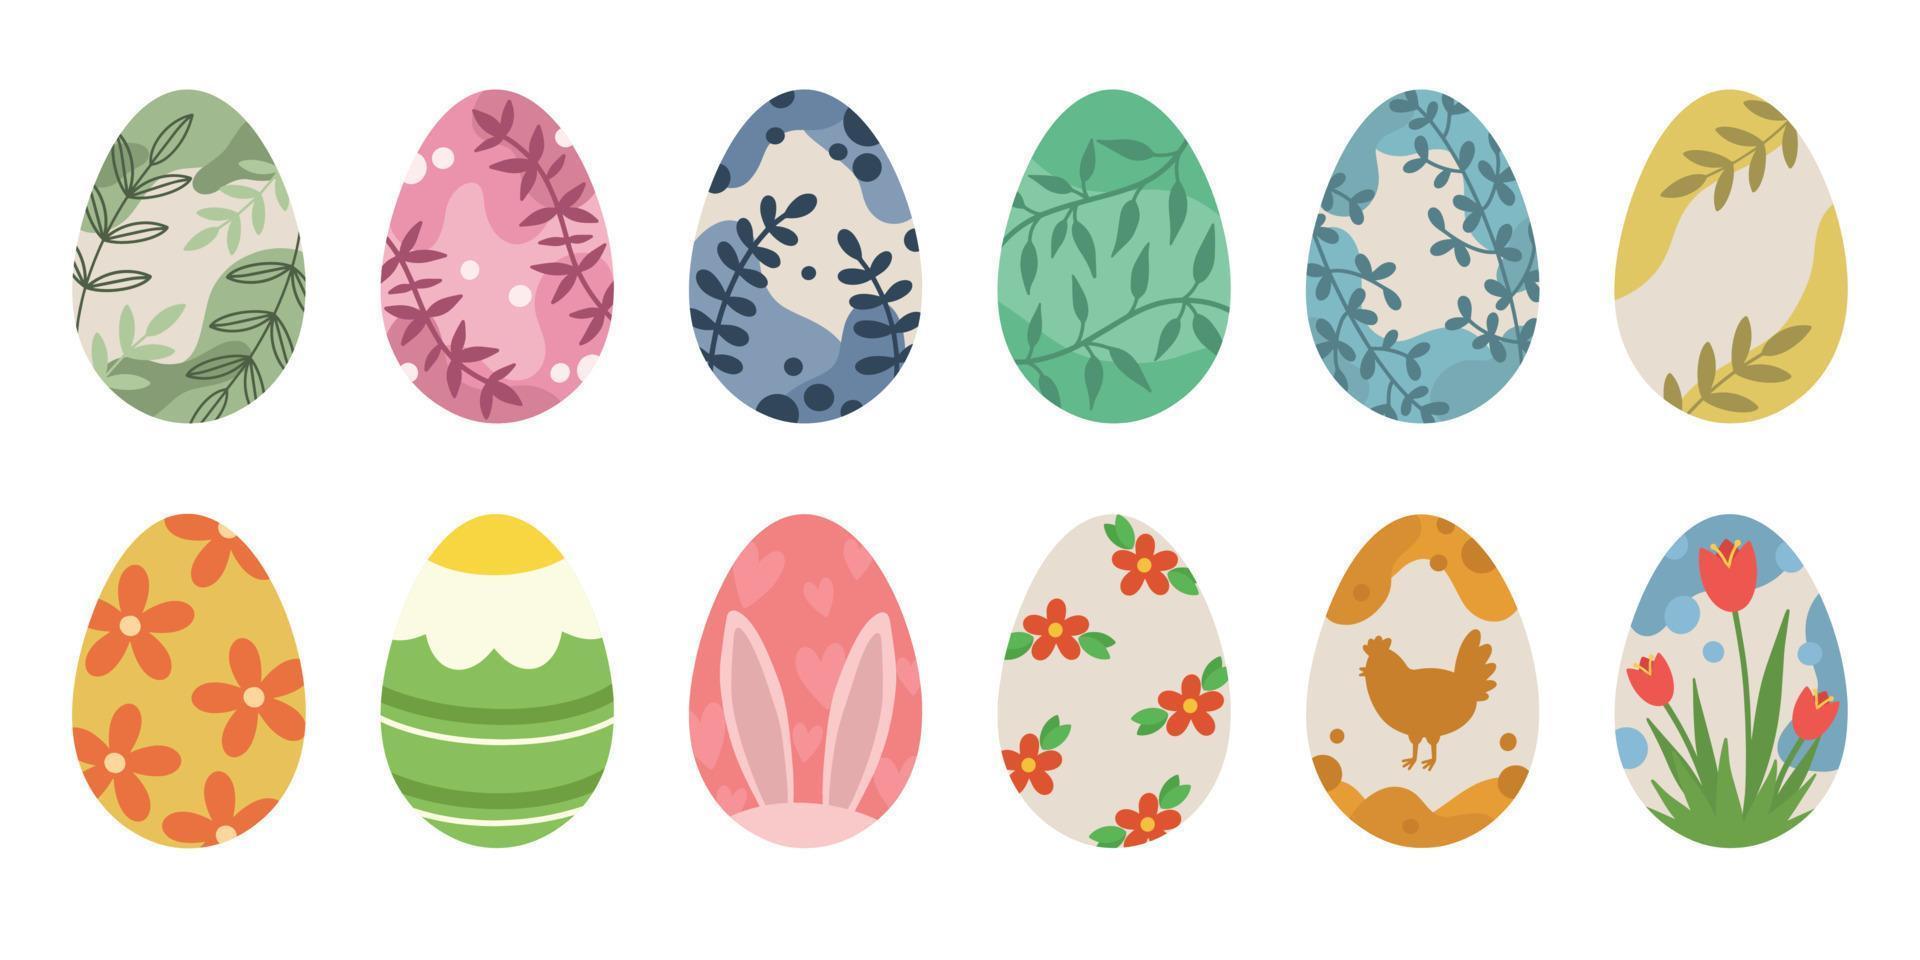 A set of colored easter eggs. Cute easter eggs for decoration. Easter eggs vector icons. Stylish painted eggs for Easter.